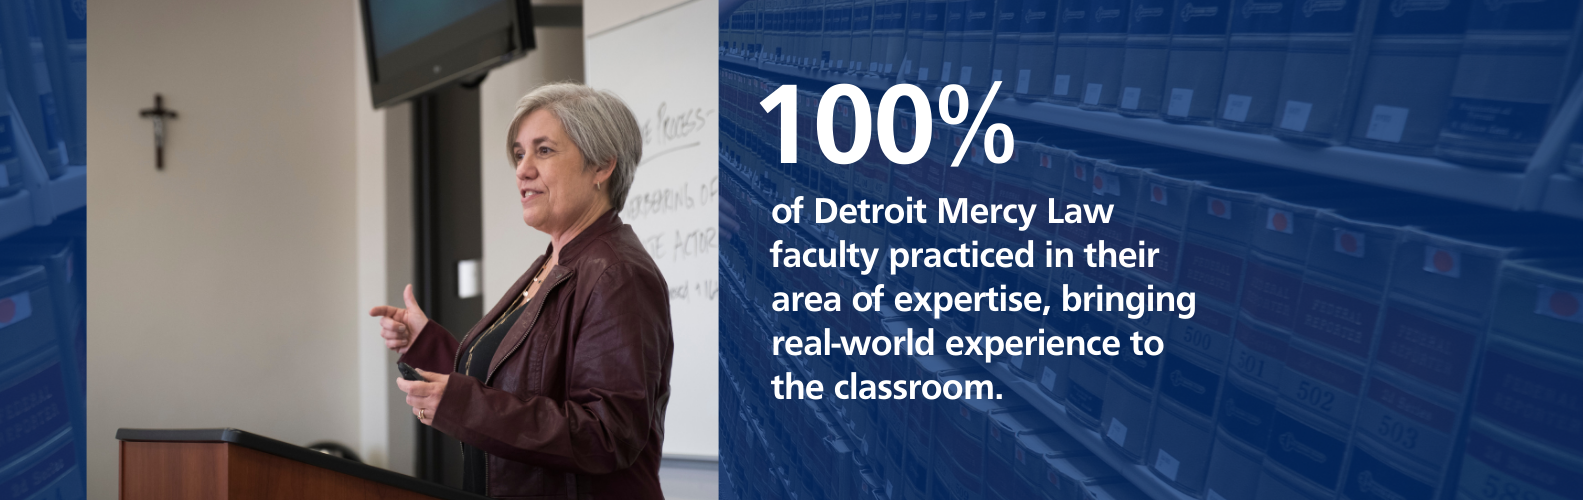 Faculty member teaching class; 100% of Detroit Mercy Law faculty practiced in their area of expertise, bring real-world experience to the classroom